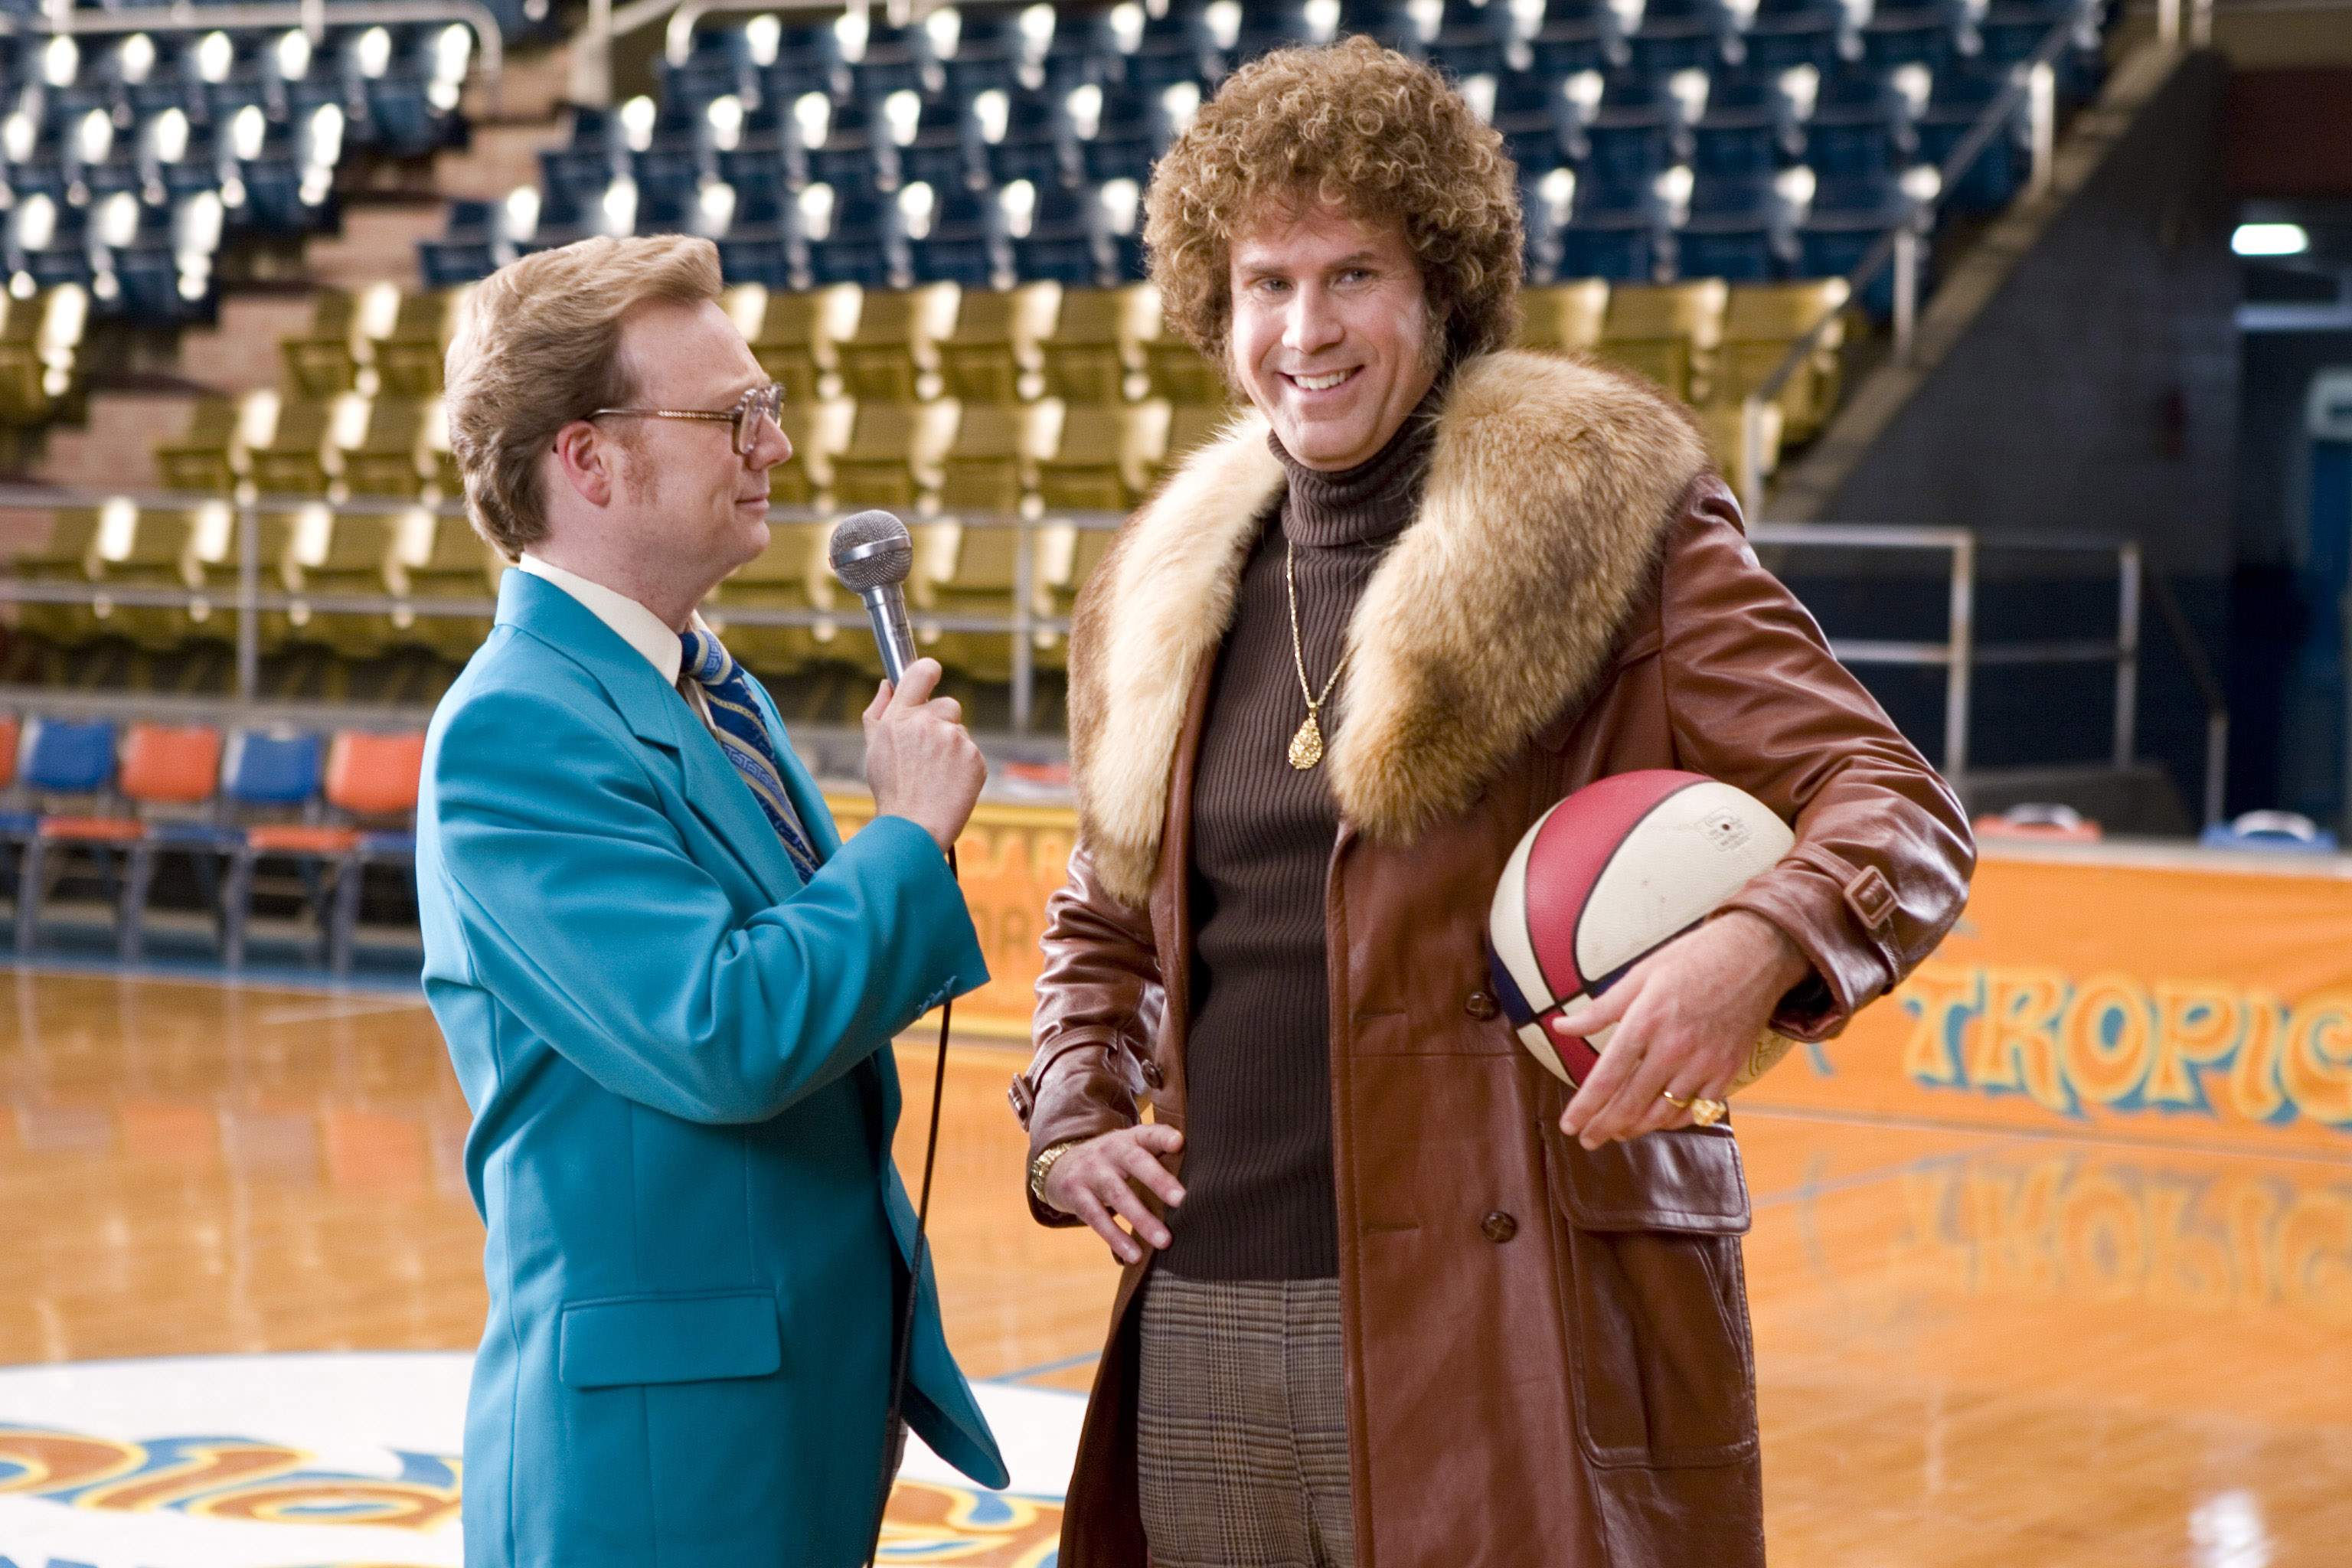 Andrew Daly stars as Dick Pepperfield and Will Ferrell stars as Jackie Moon in New Line Cinema’s upcoming comedy, SEMI-PRO. Photo Credit: Frank Masi